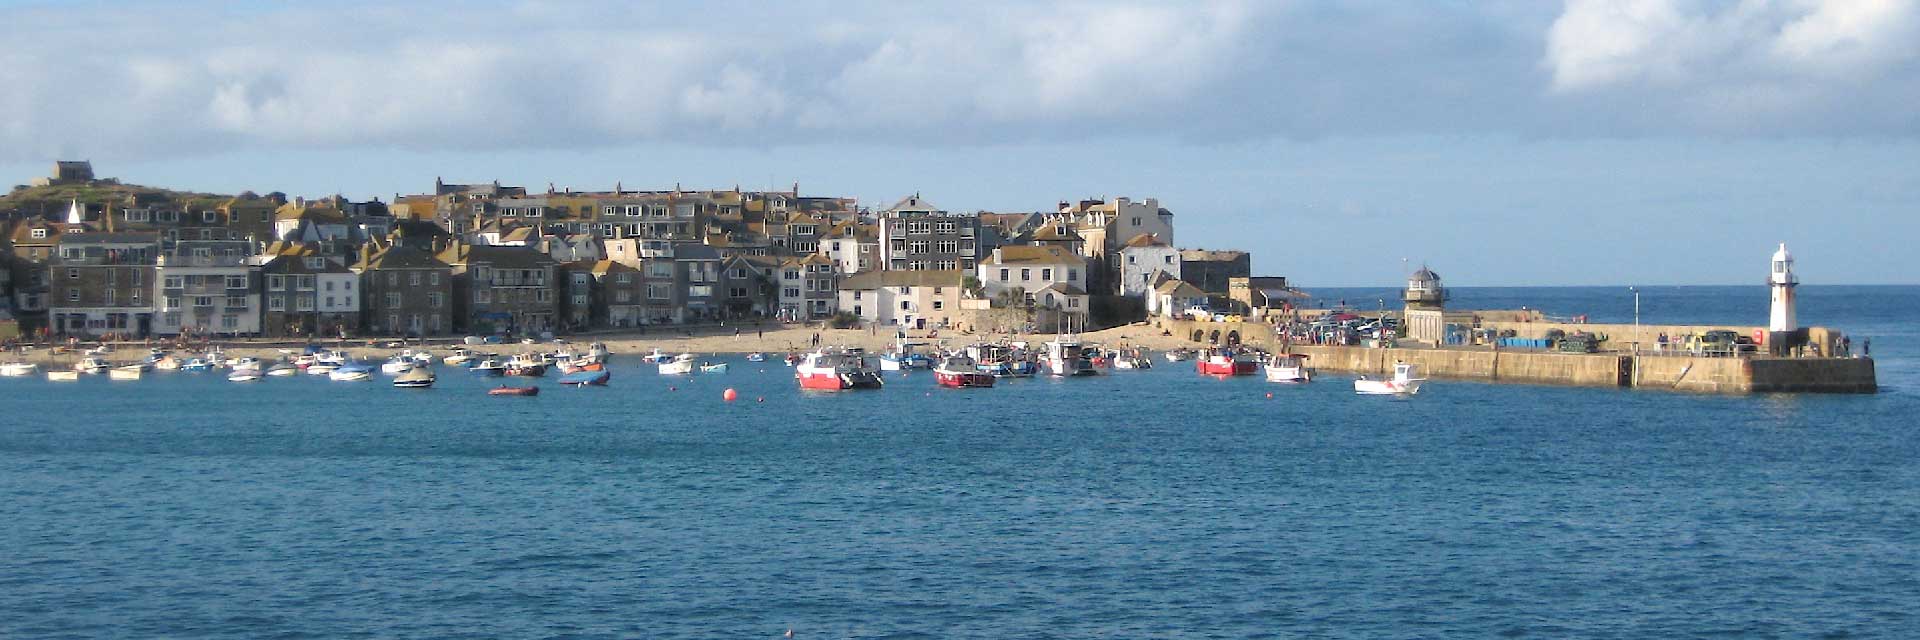 St. Ives and harbour